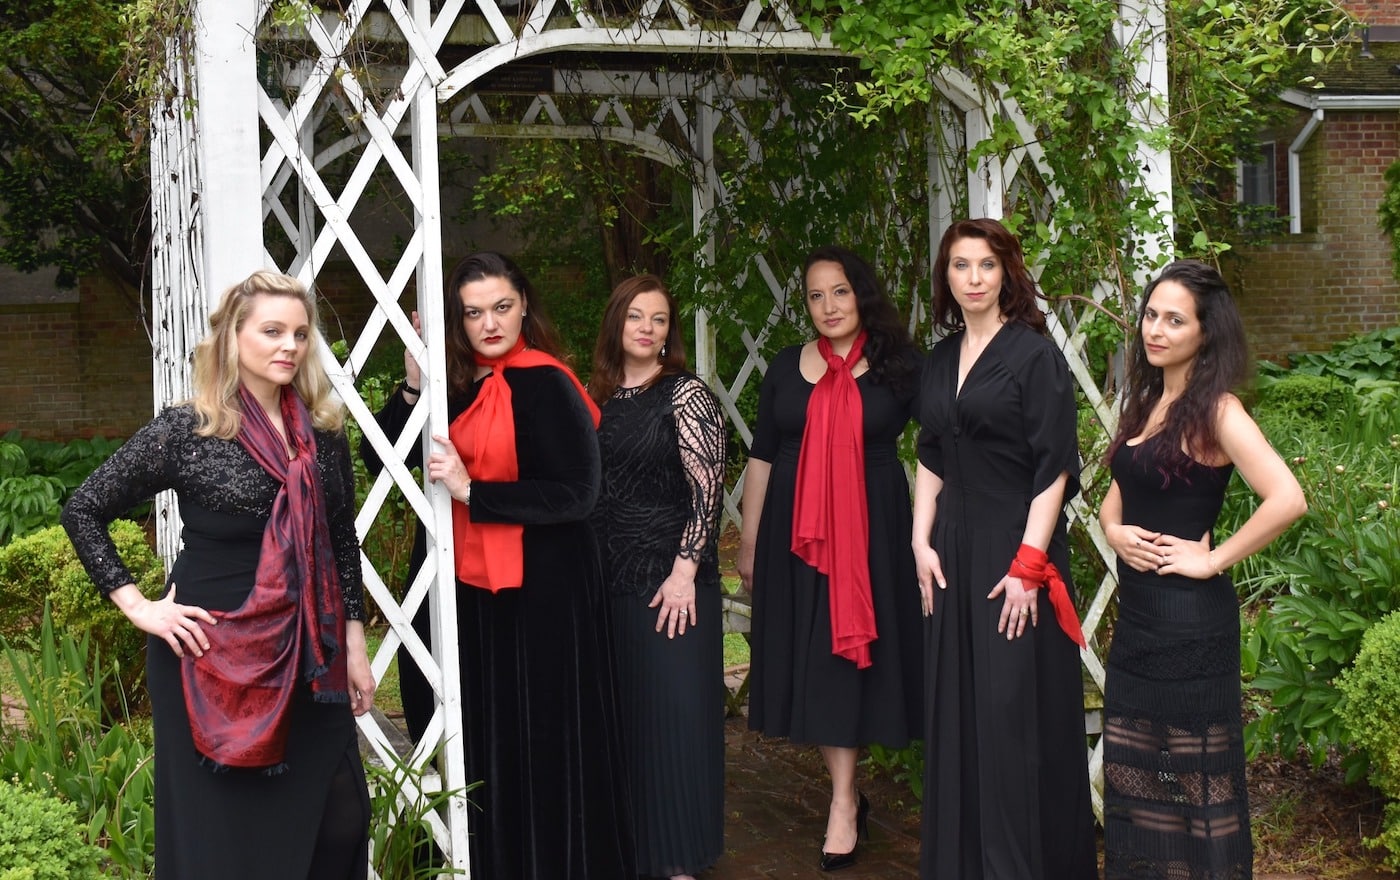 six women dressed mostly in black and red, standing outside under a lattice work